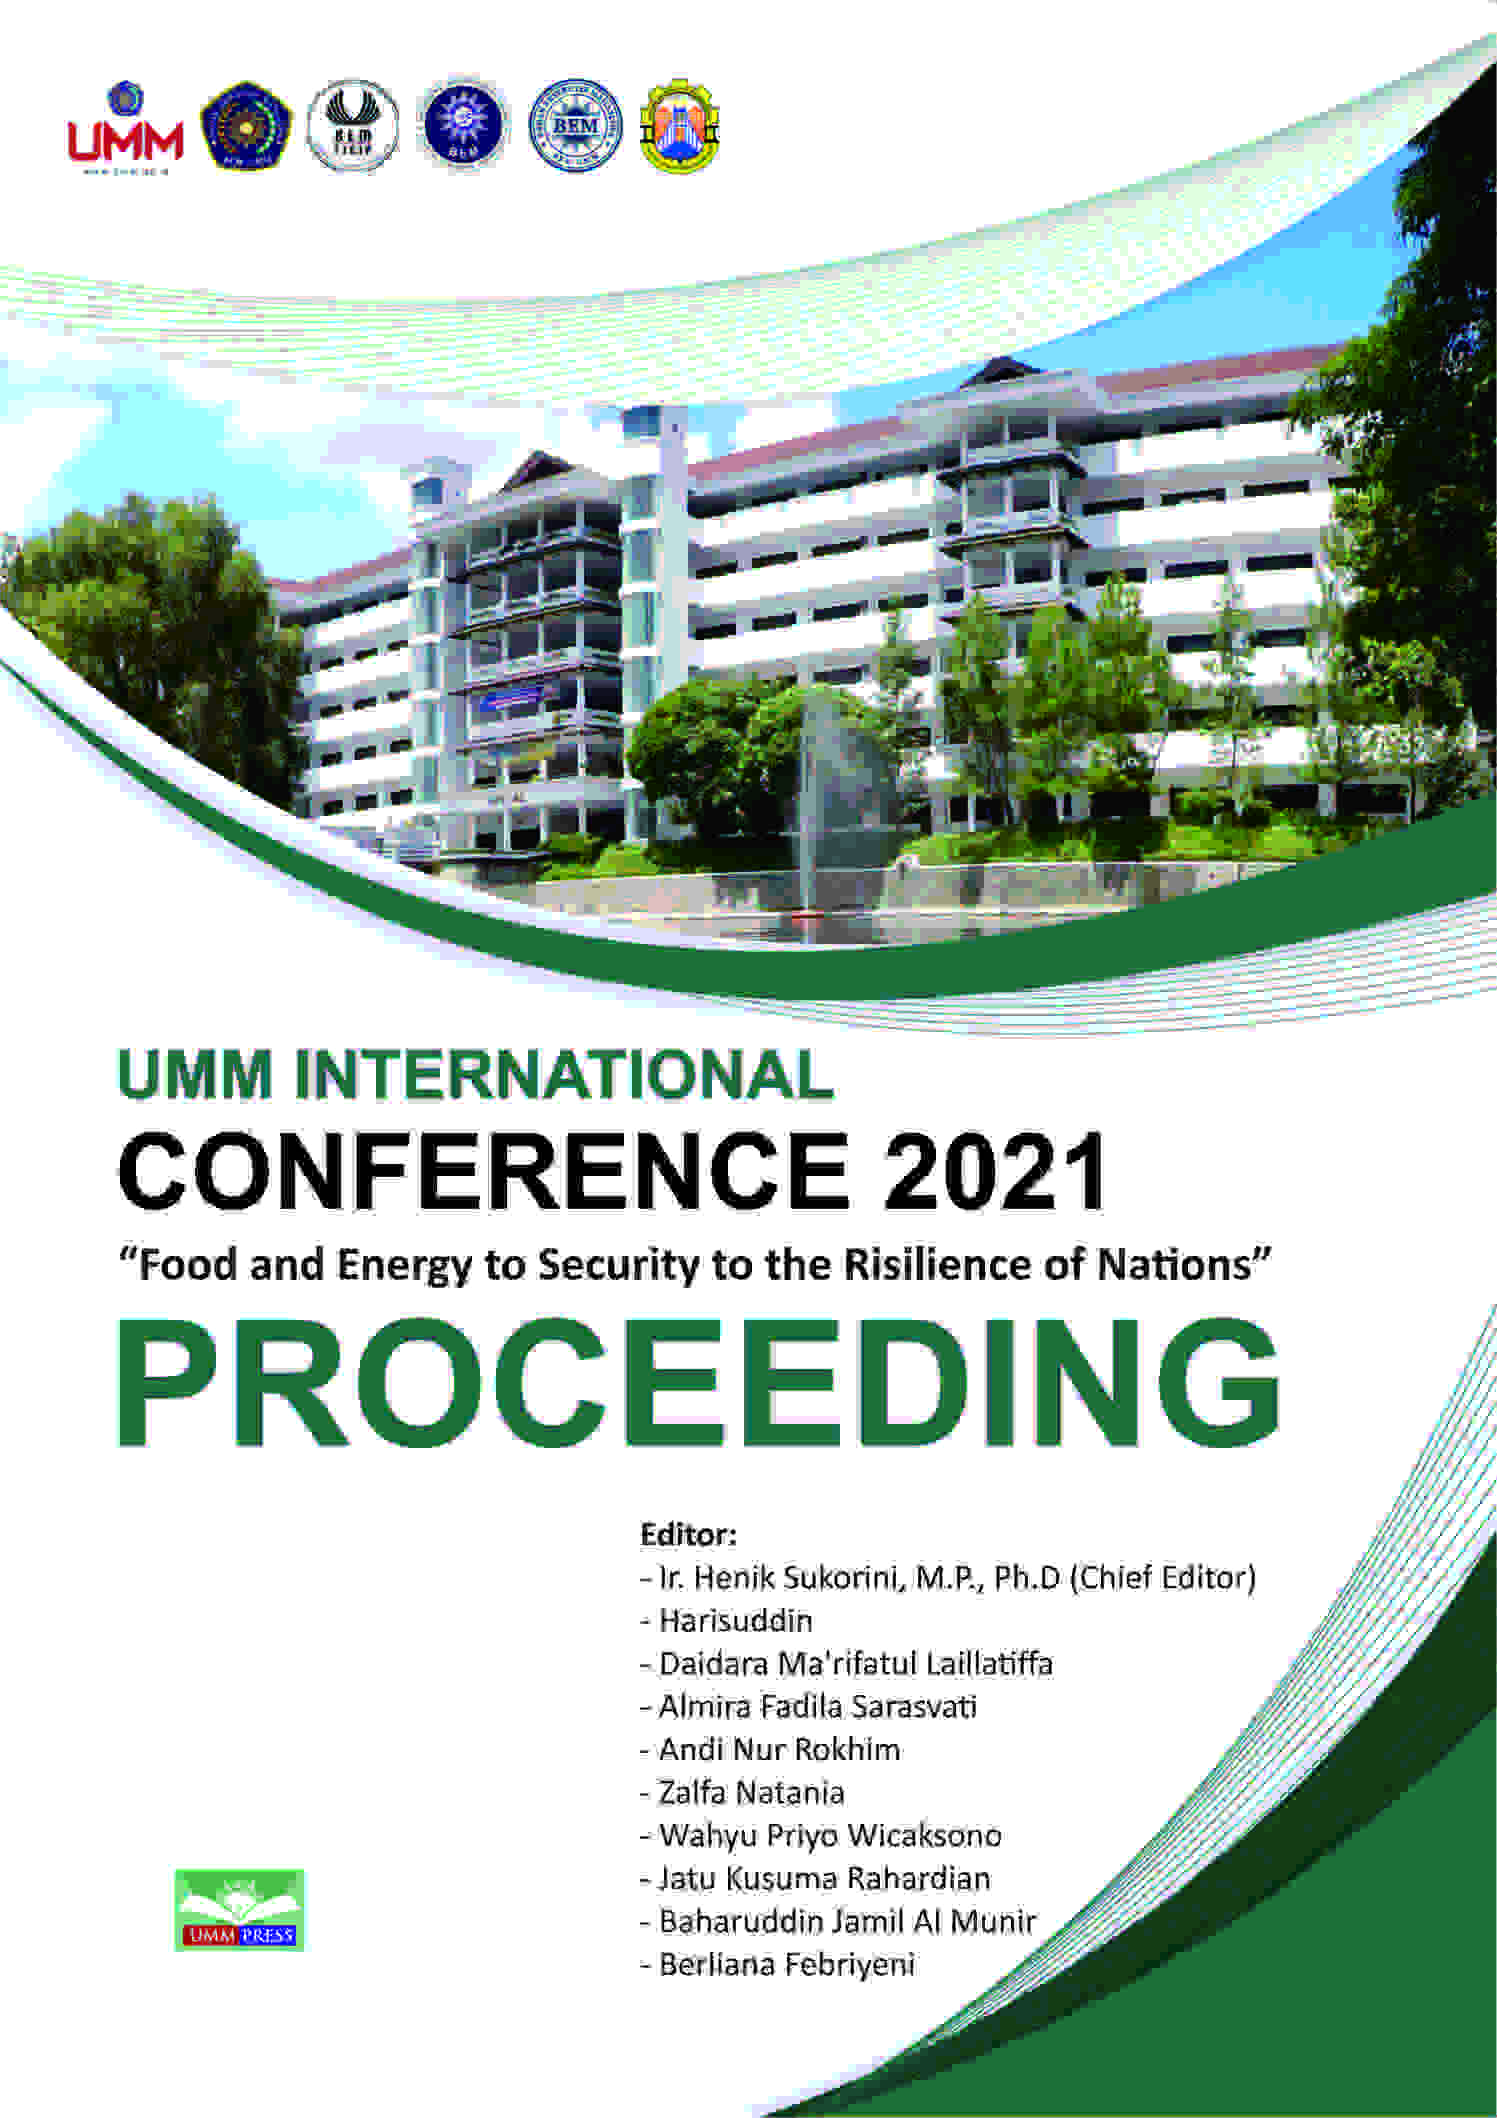 PROCEEDING UMM INTERNATIONAL CONFERENCE AND PROCEEDING 2021: FOOD AND ENERGY TO SECURITY TO THE RECI